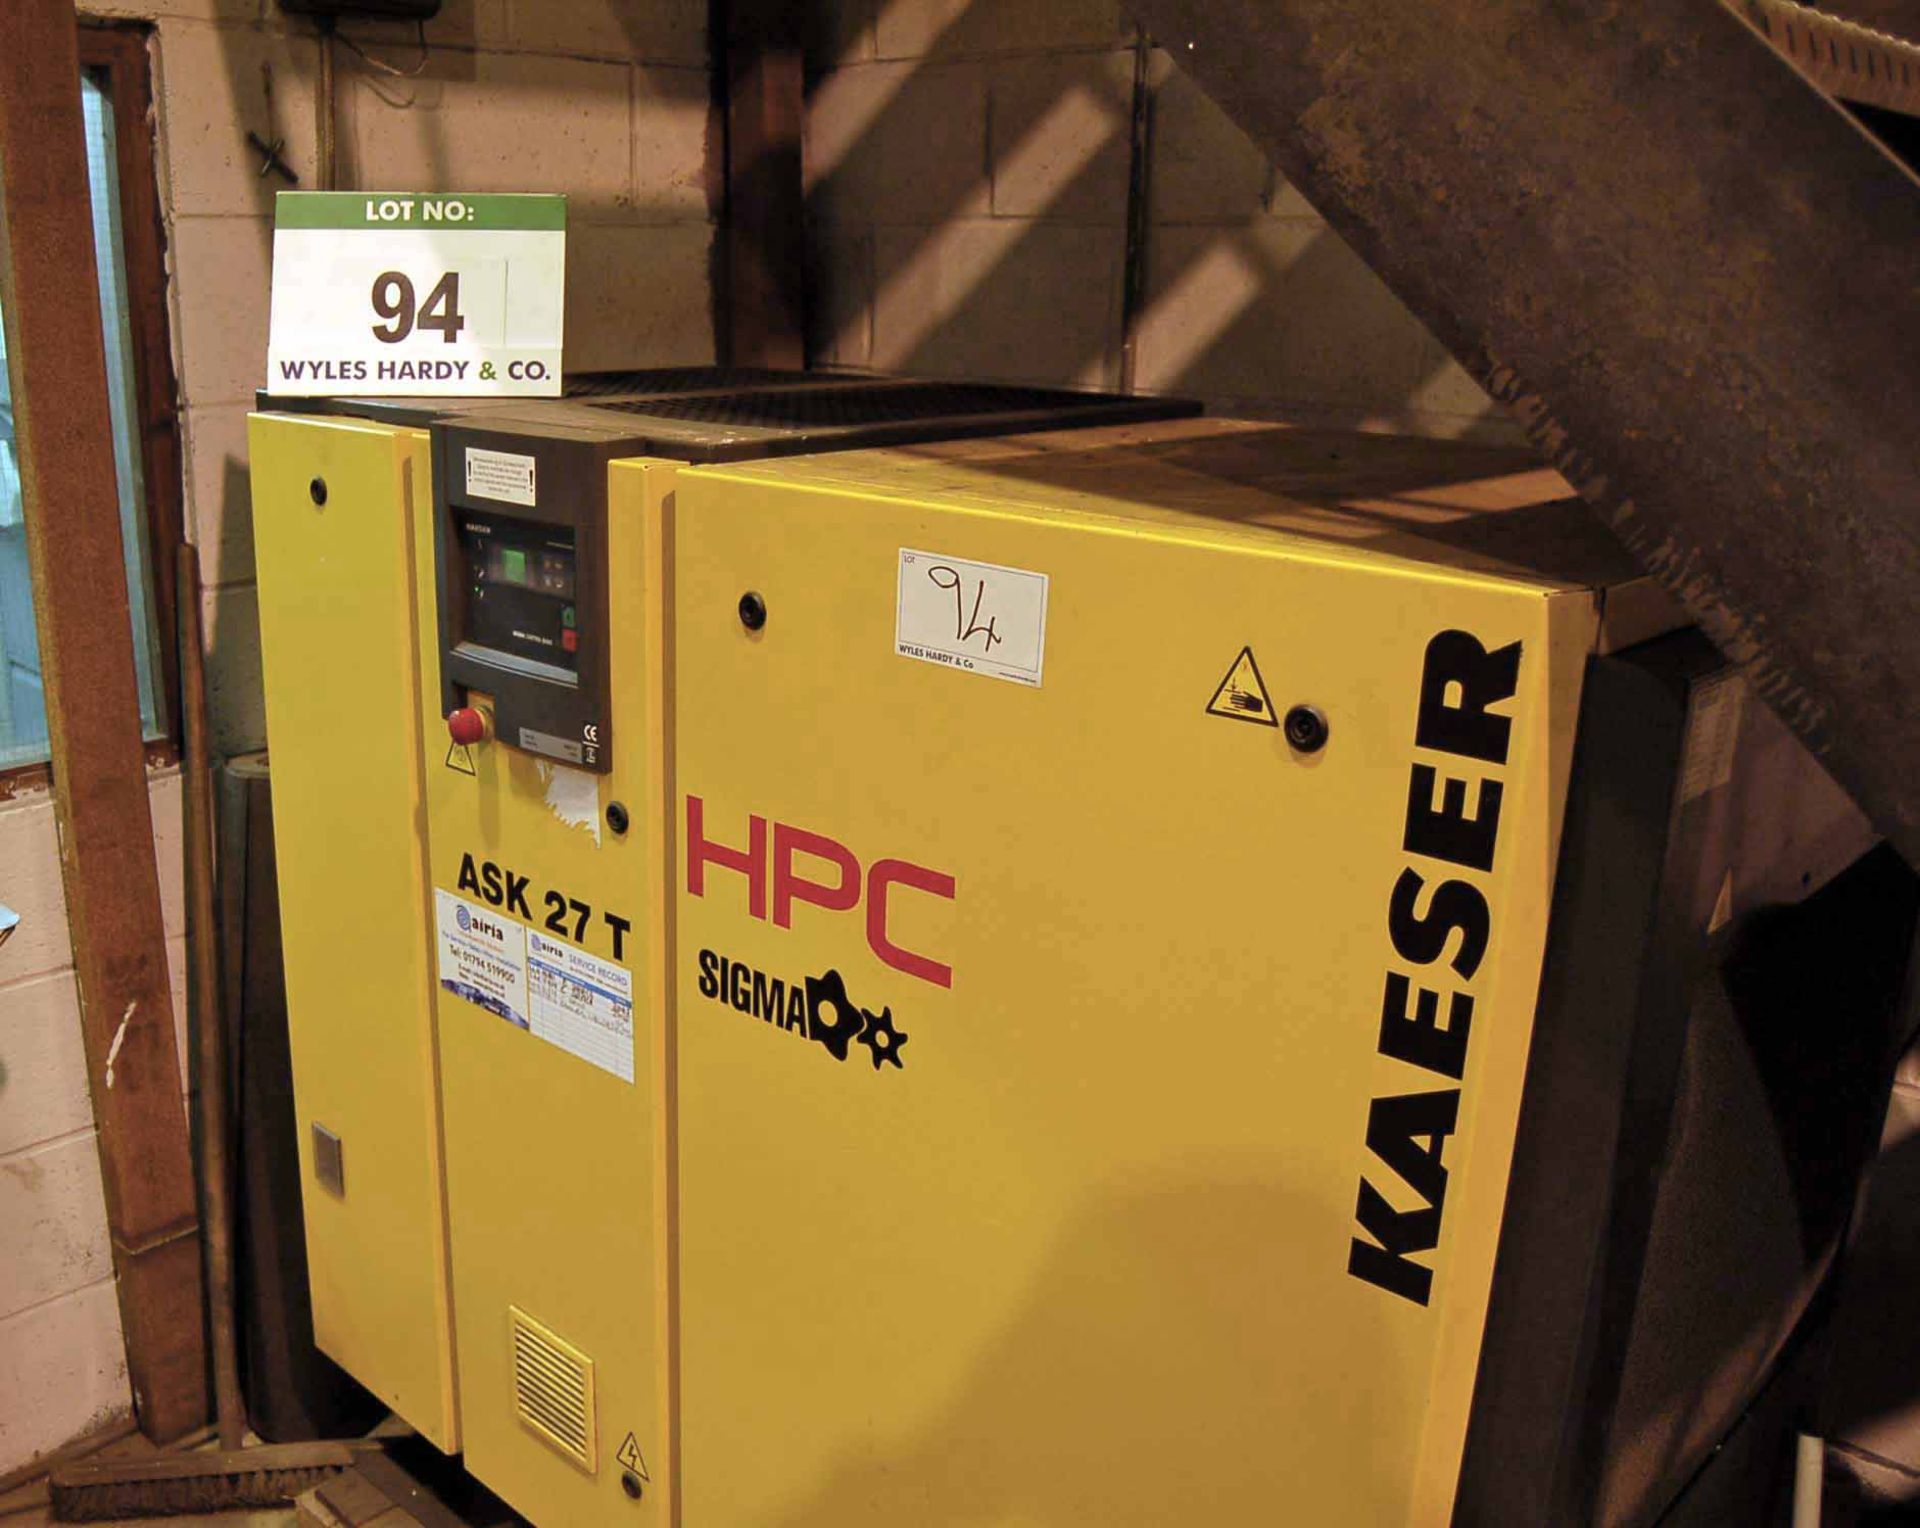 An HPC SIGMA Ask 27T Packaged Rotary Screw Air Compressor with SIGMA Basic Control (A Method